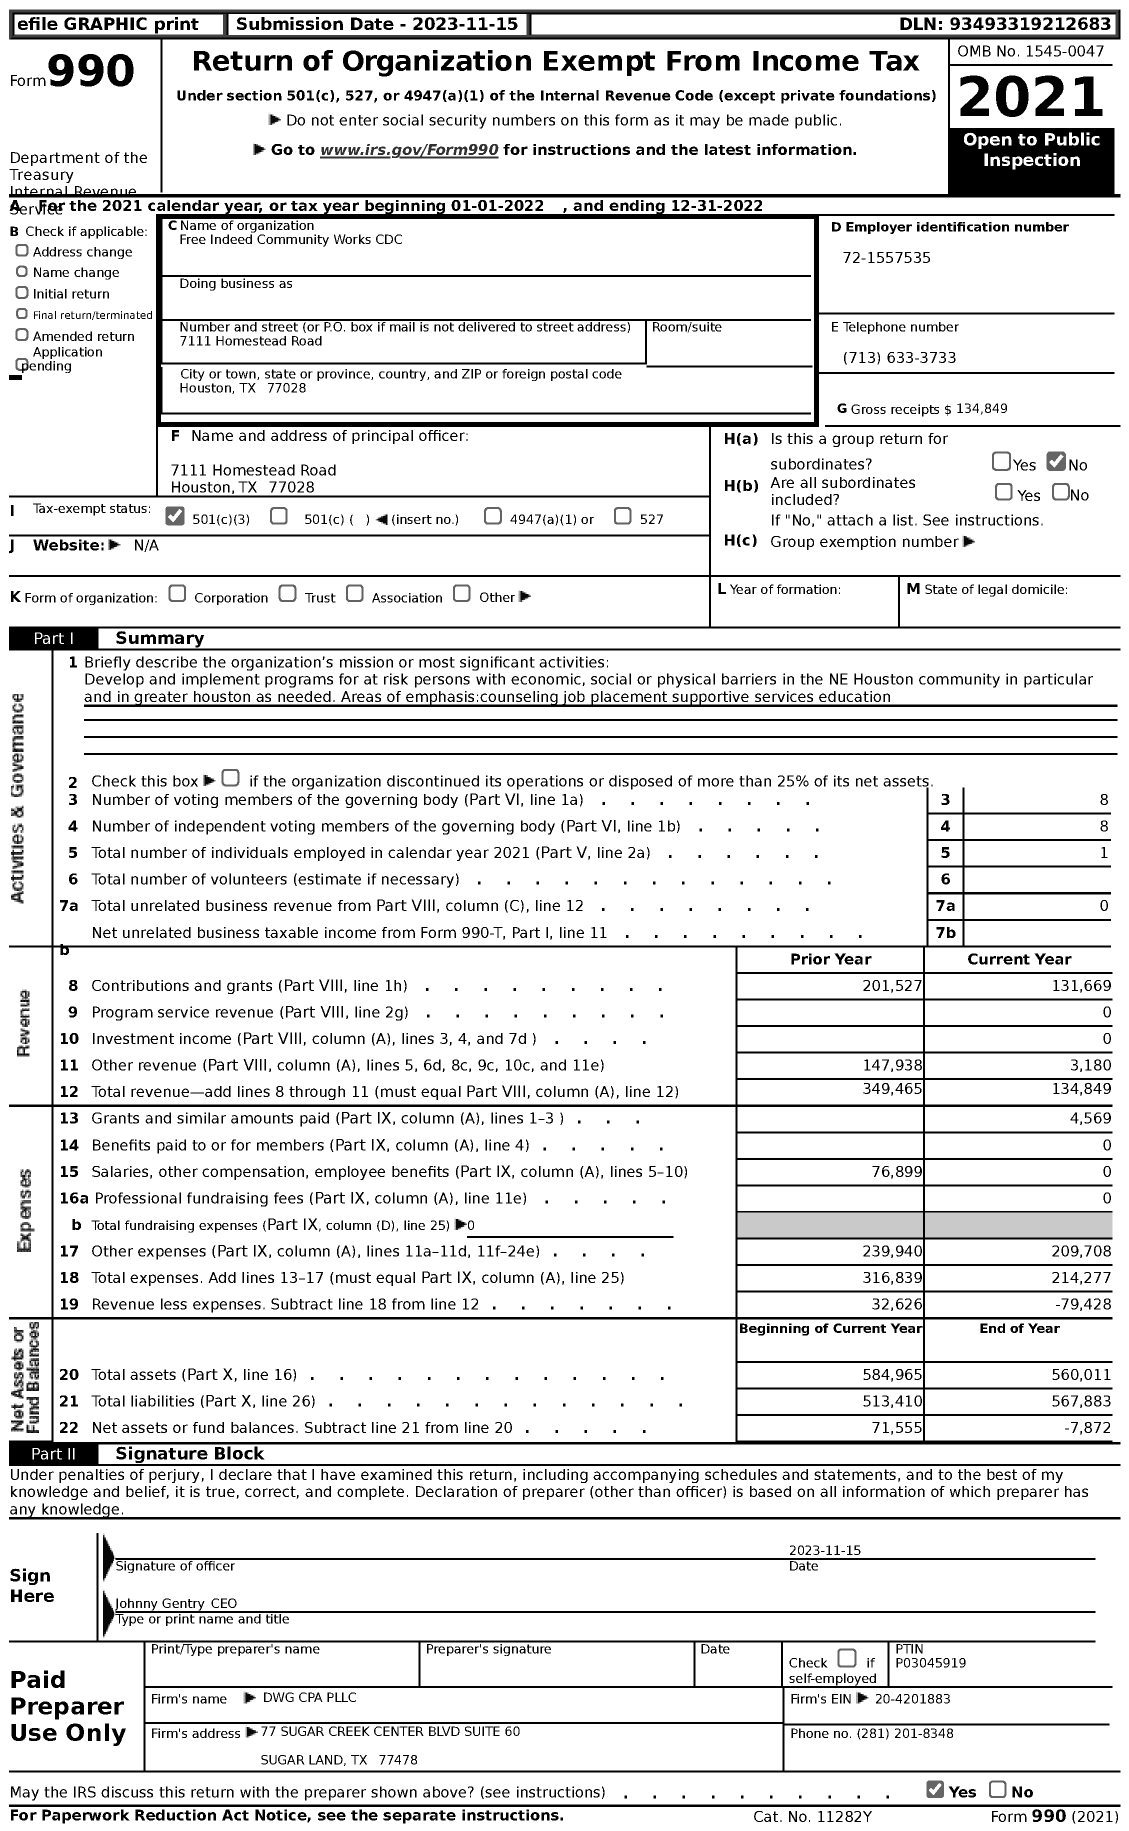 Image of first page of 2022 Form 990 for Free Indeed Community Works CDC